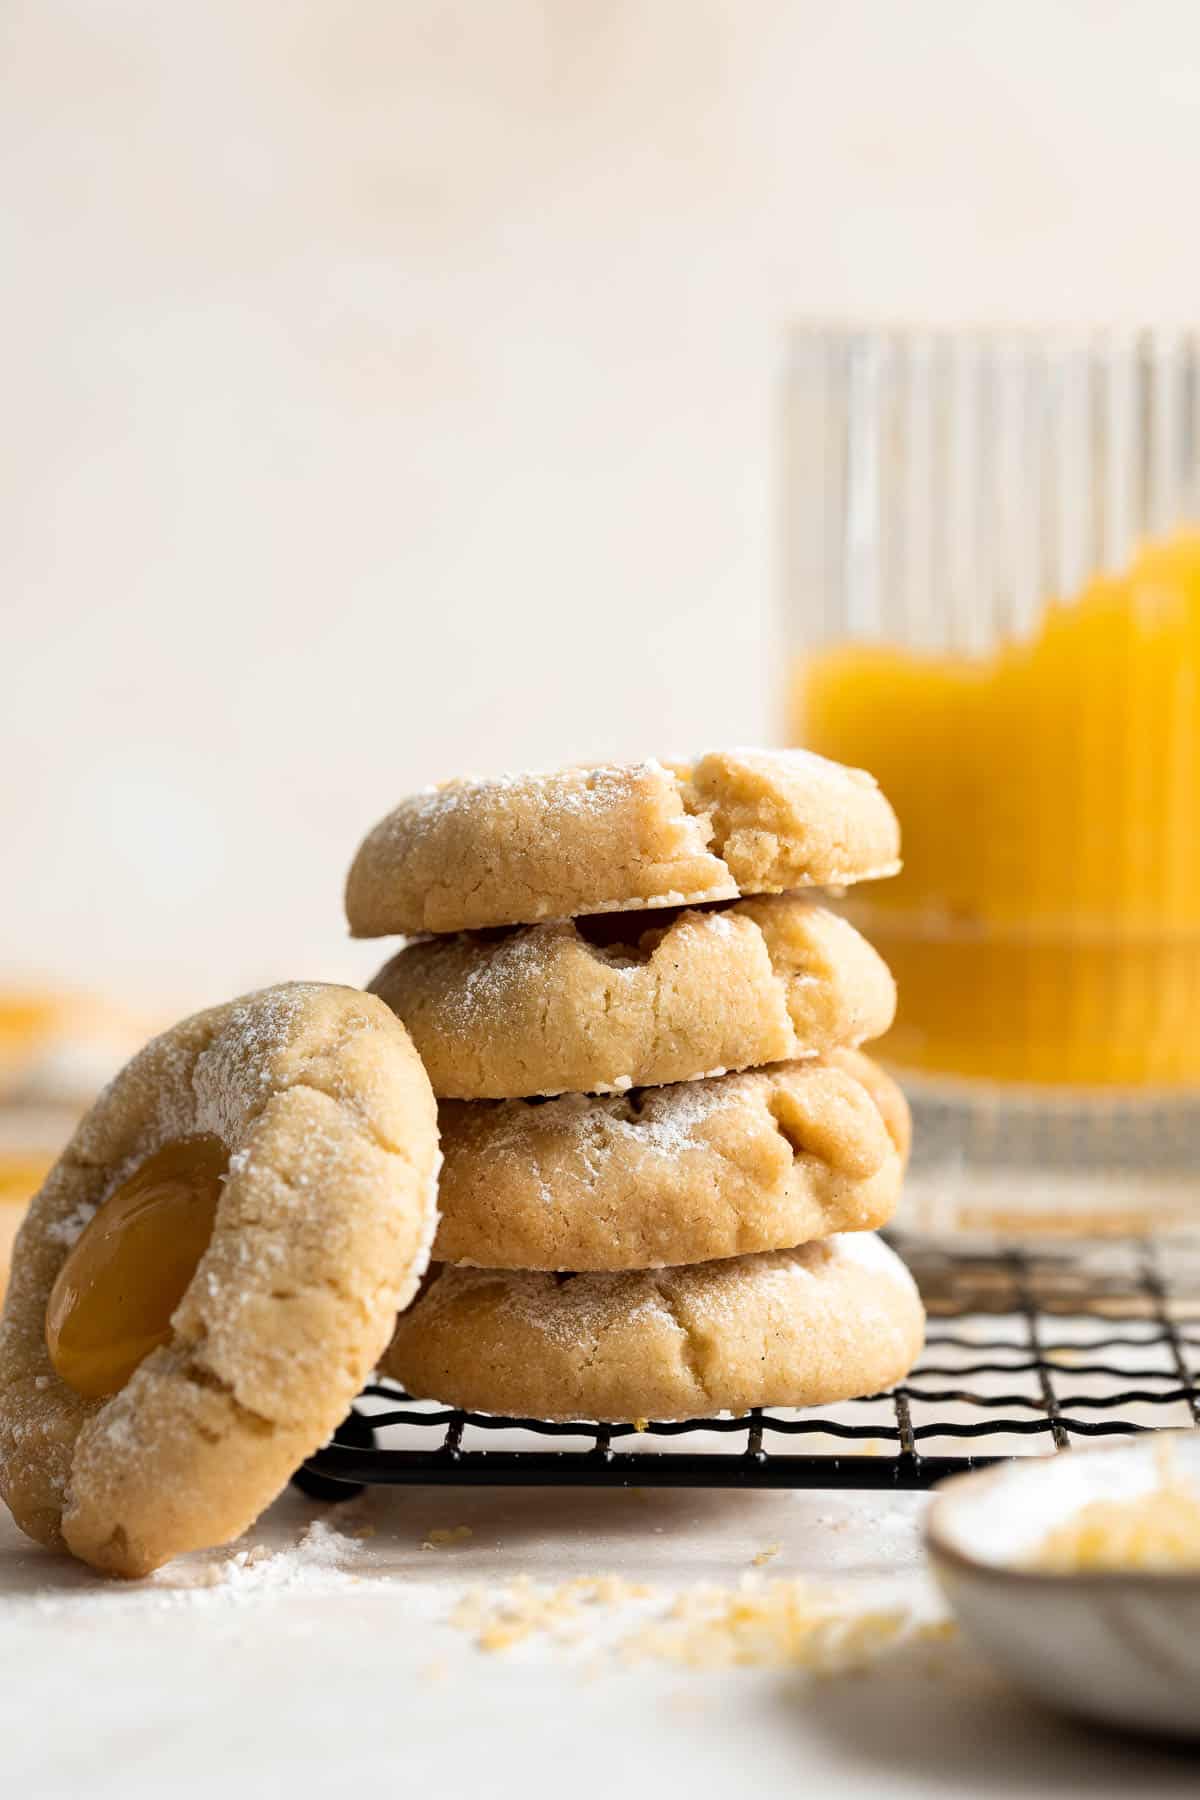 Sweet and sour Lemon Curd Cookies are made of buttery shortbread thumbprint cookies dusted with powdered sugar, and filled with sweet and tangy lemon curd. | aheadofthyme.com